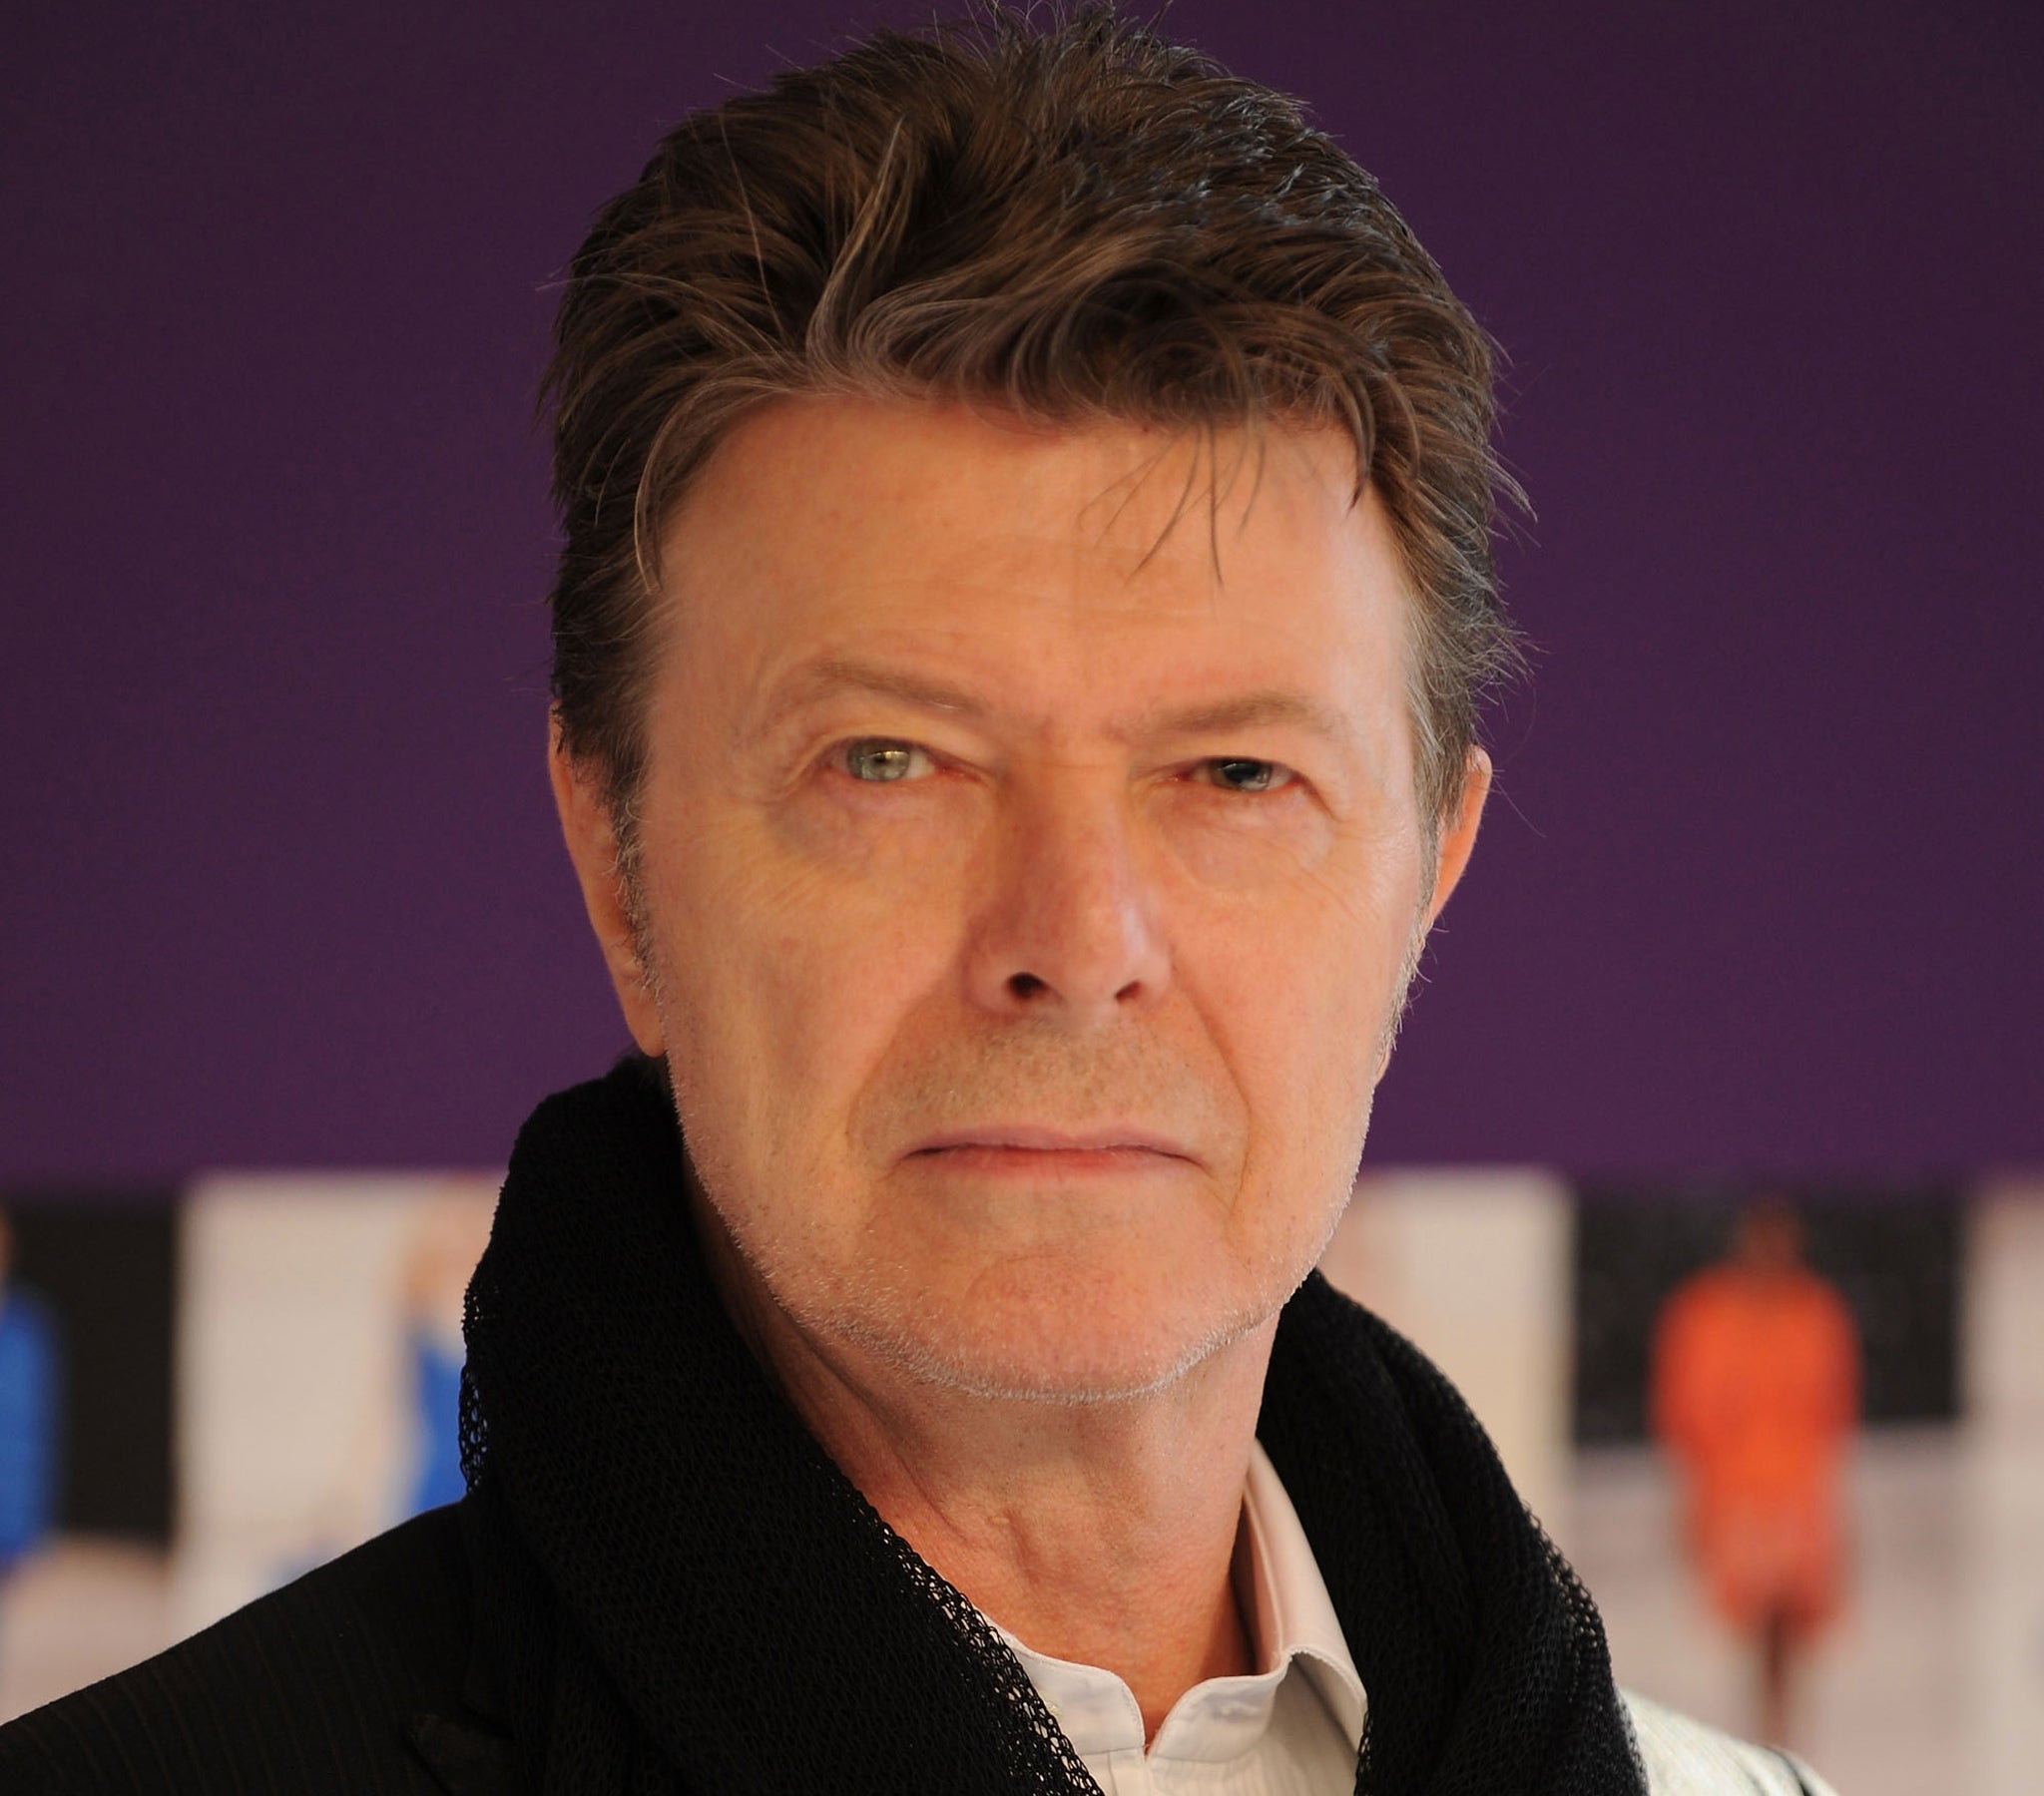 David Bowie is tipped to win Best Male at the Brit Awards